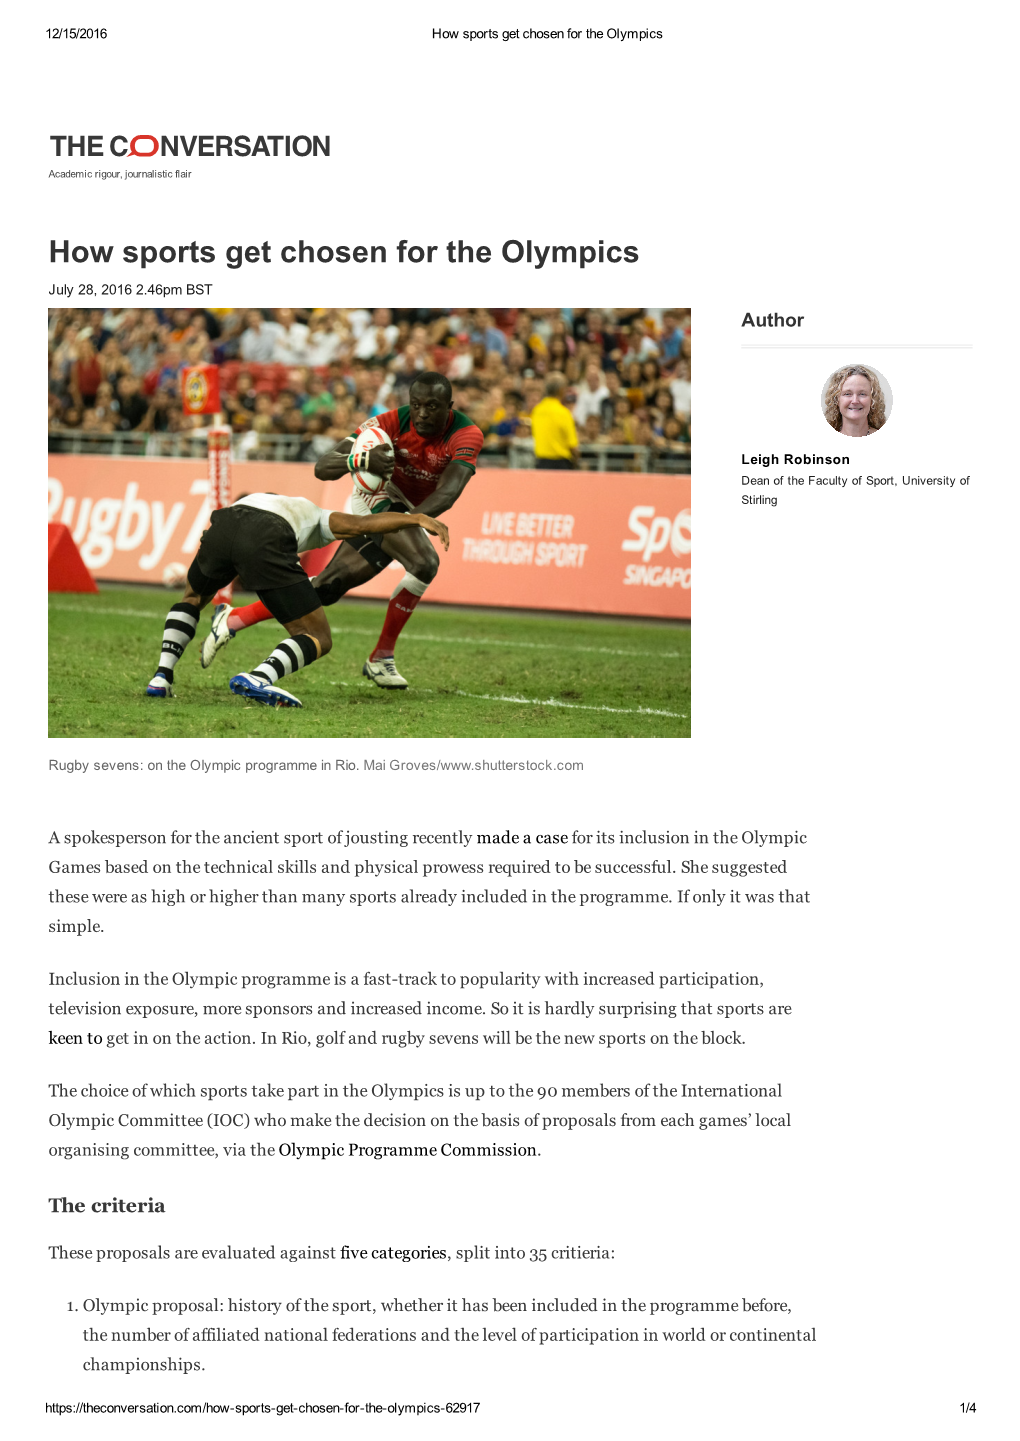 How Sports Get Chosen for the Olympics